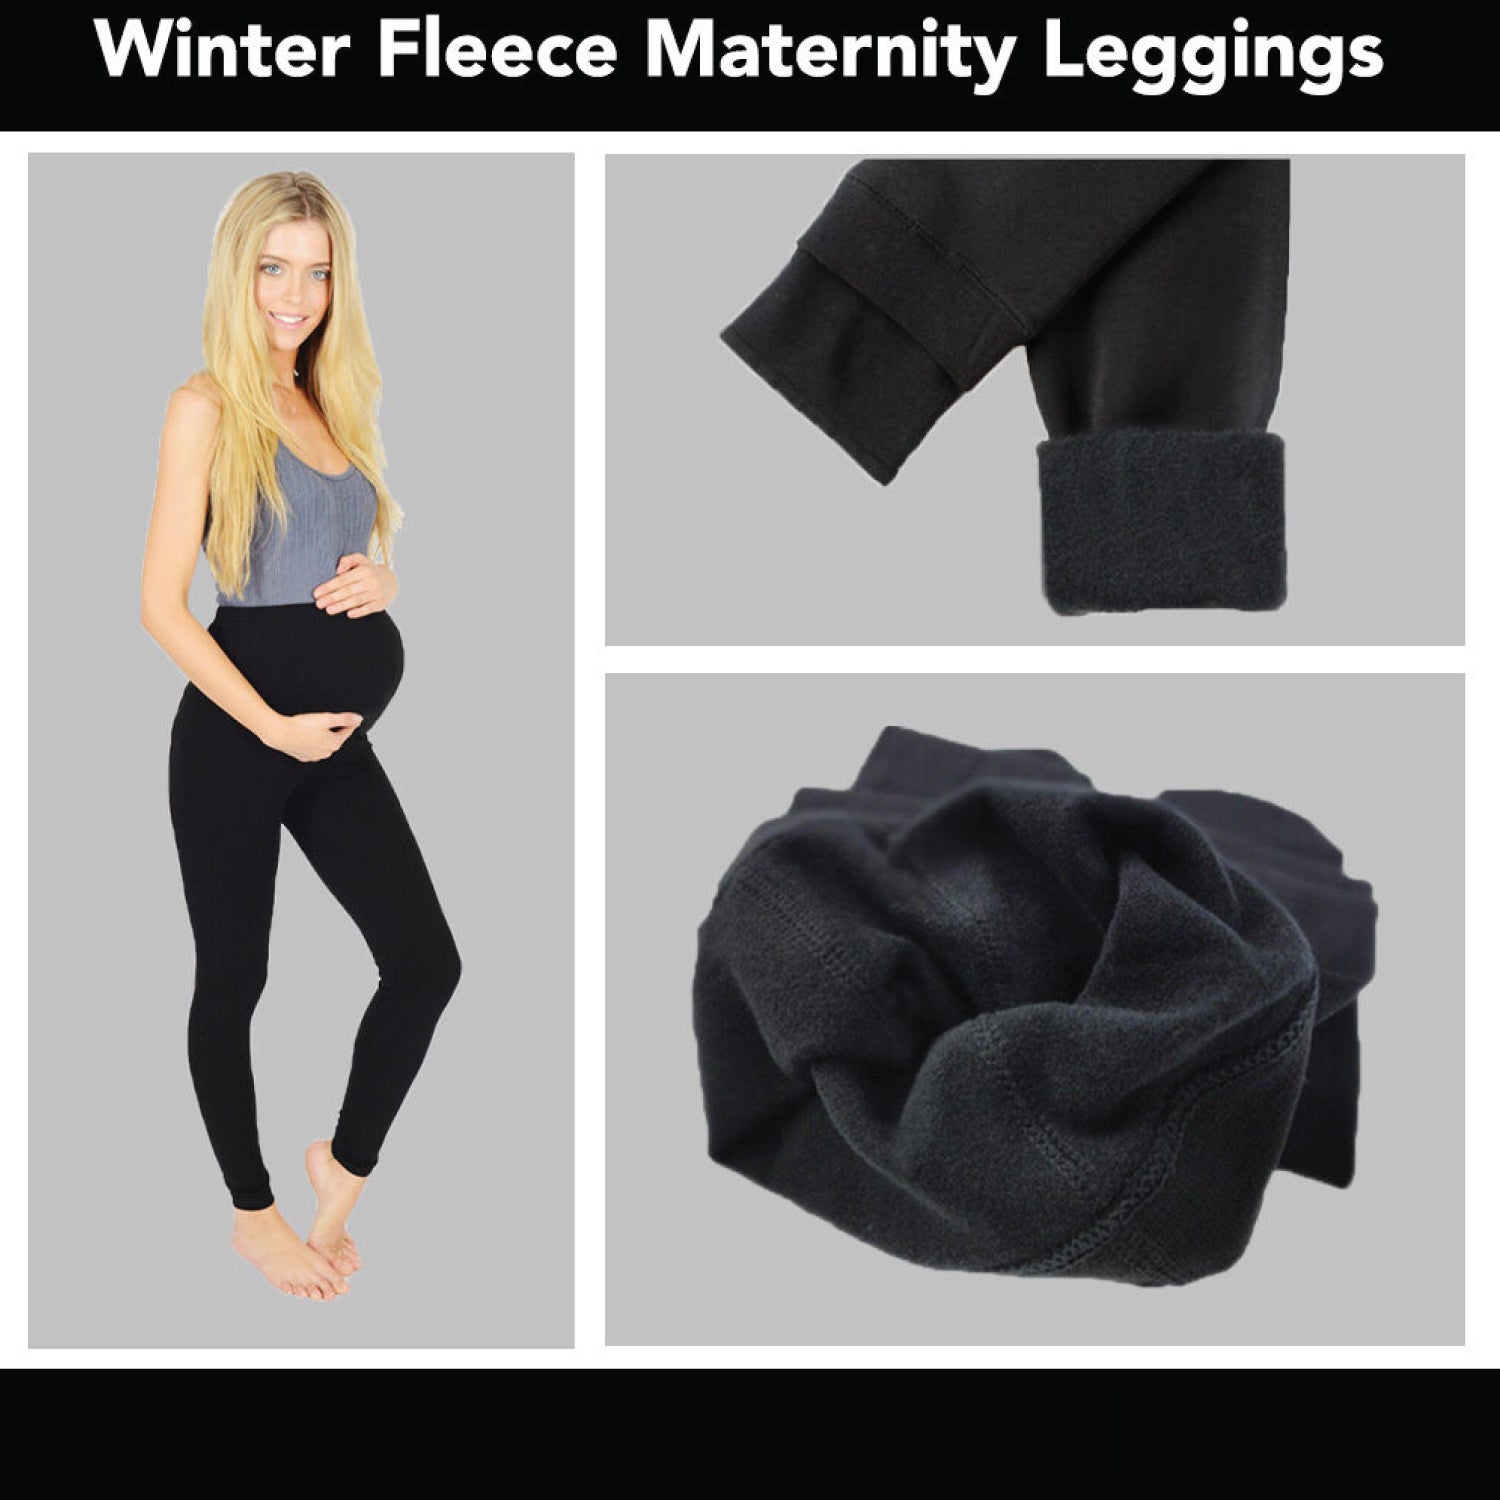 Extra Thick Winter Maternity Leggings Soft Cotton & Fleece Lined